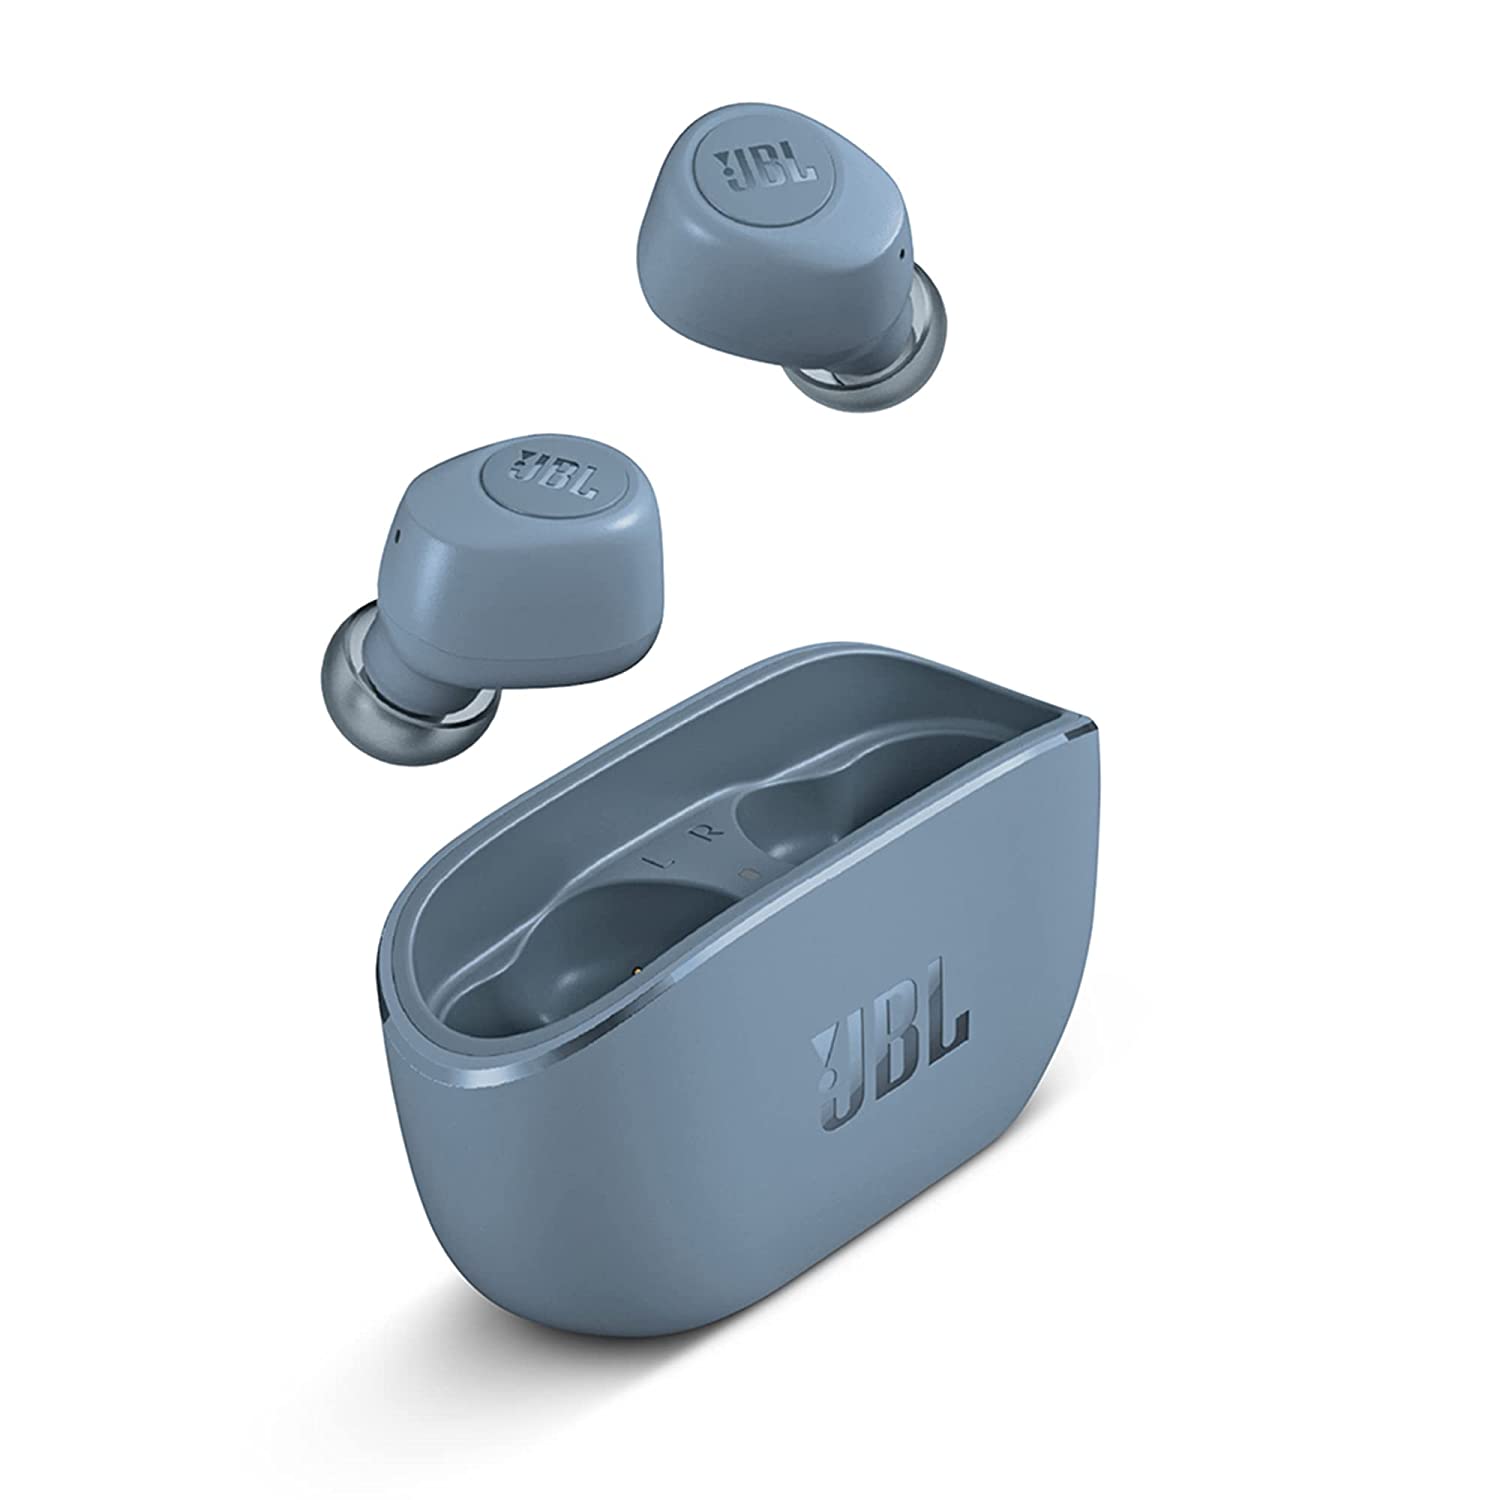 Jbl Wave 100 Bluetooth Truly Wireless in Ear Earbuds with Mic, 20 Hours Playtime, Deep Bass Sound, Use Single Earbud Or Both, Bluetooth 5.0, Voice Assistant Support for Mobile Phones (Blue)